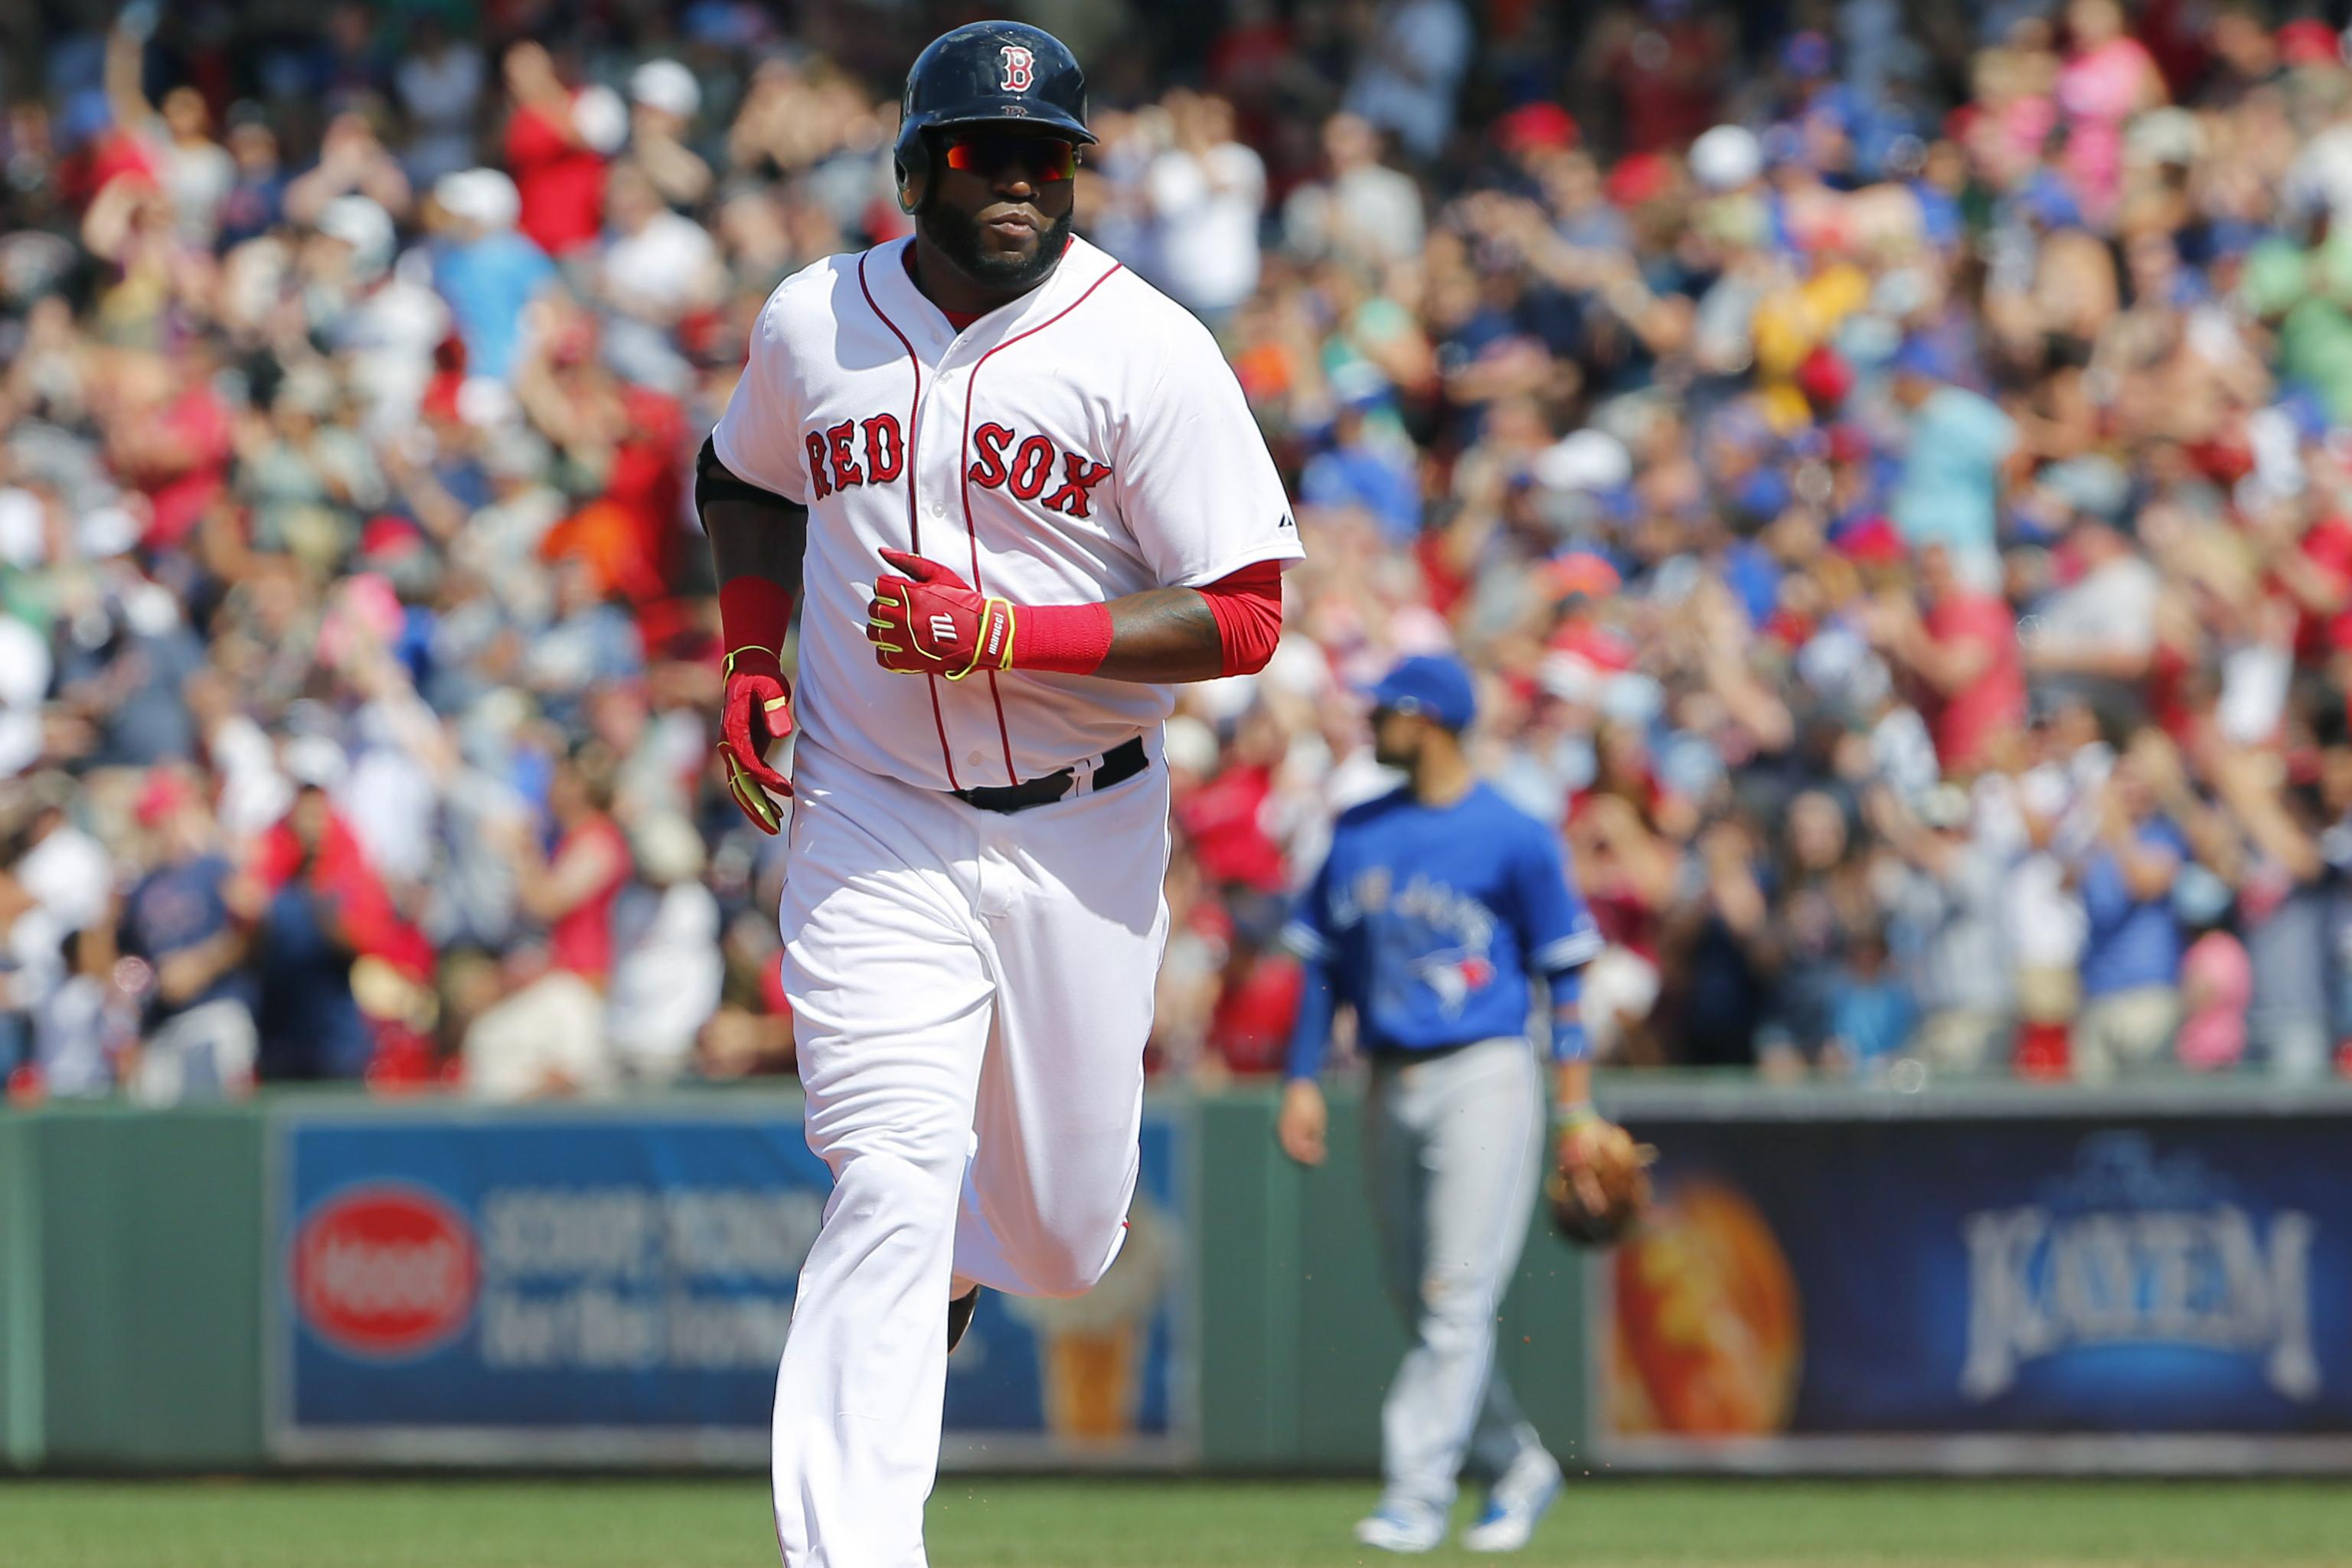 Red Sox Journal: Ortiz has own routine to break out of slumps